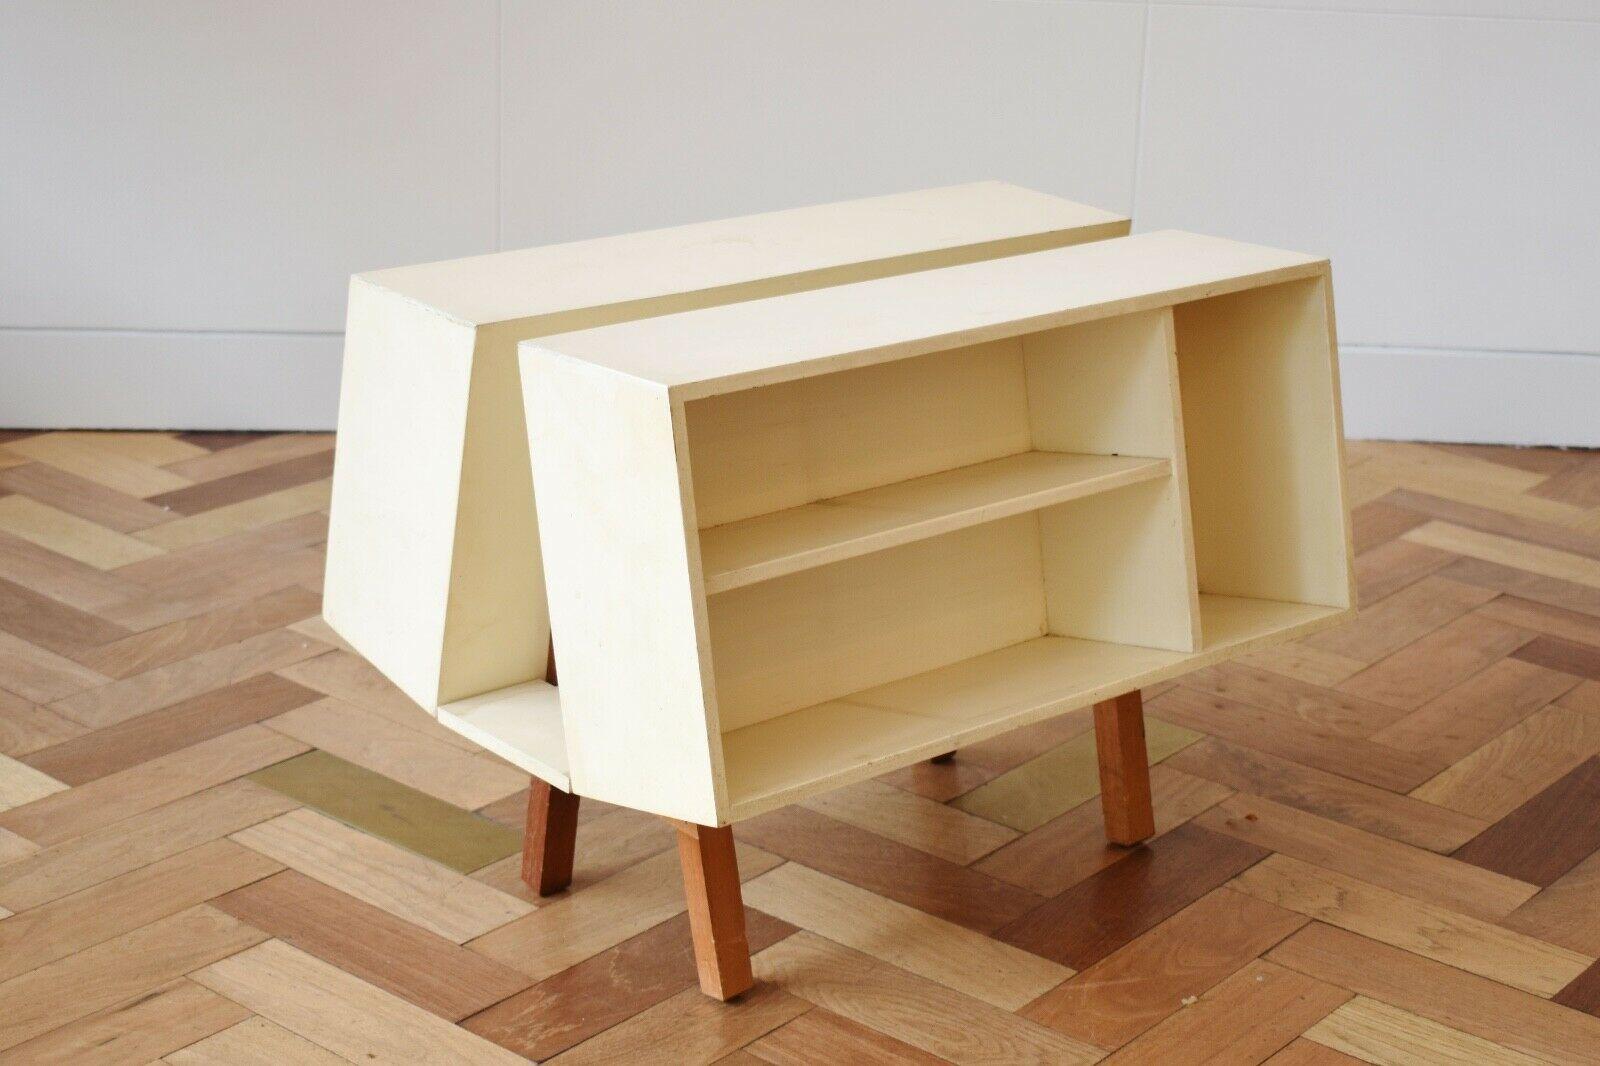 Mid 20th Century Penguin Donkey Mark II side table was designed in 1963 by Ernest Race

The piece serves as a multi-functional unit with bookshelf and storage space on both sides, and was manufactured by Isokon.

About the designer:
Ernest Race was